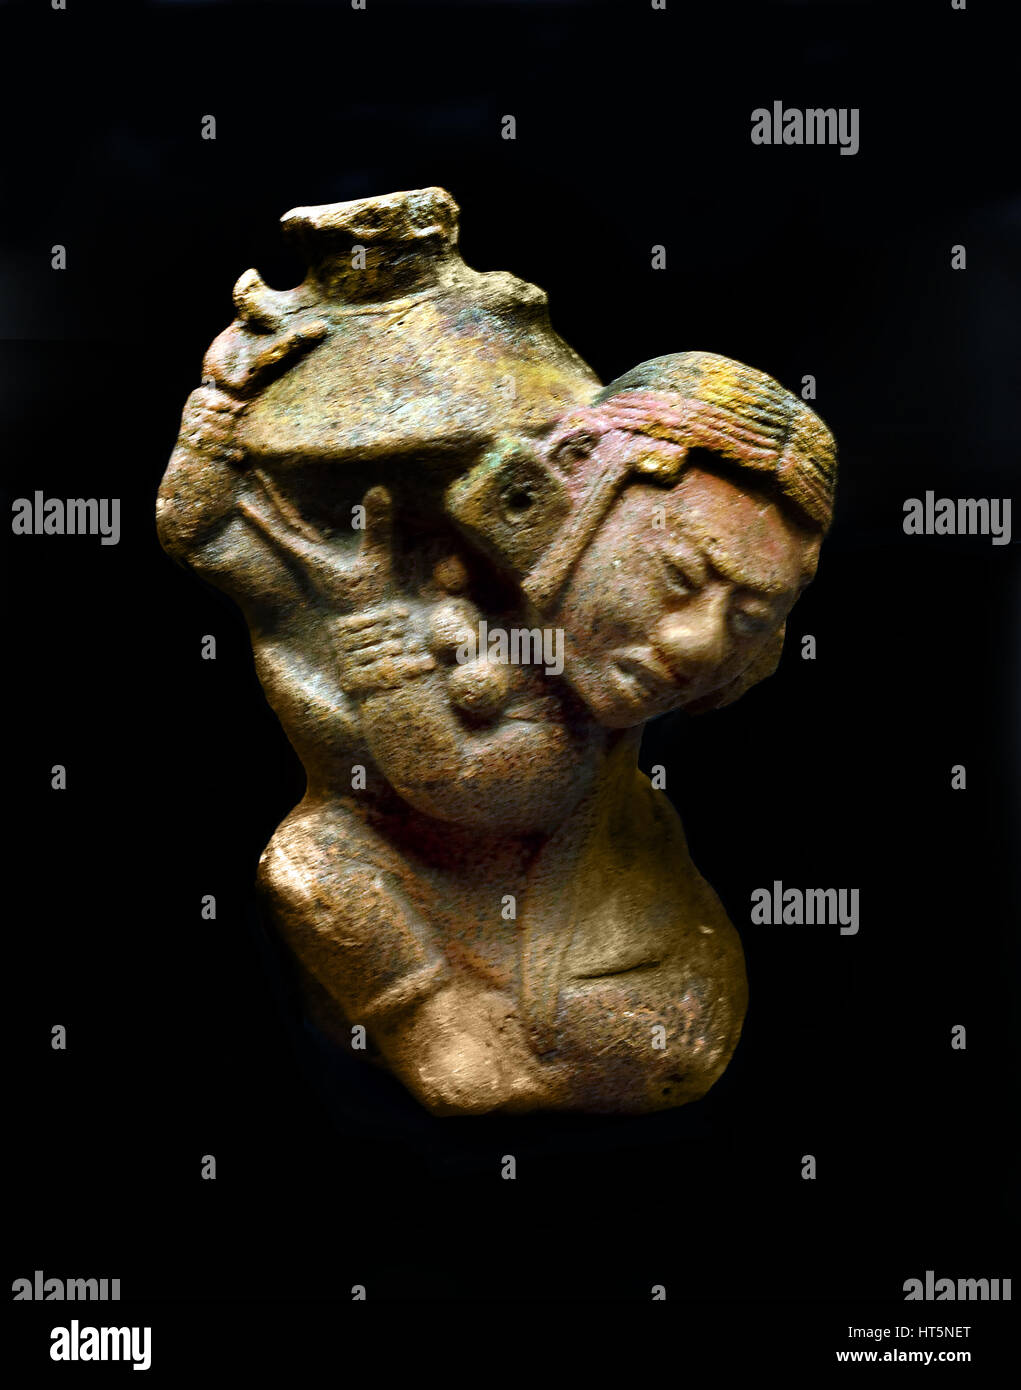 A figure supported on a knee, lifting a jug on his shoulder. Guatemala Maya (Culture)  13 x 9.7 x 7.8 cm The Mayans - Maya Mesoamerican - Pre Columbian civilization  Central America ( 2600 BC - 1500 AD ) American Stock Photo